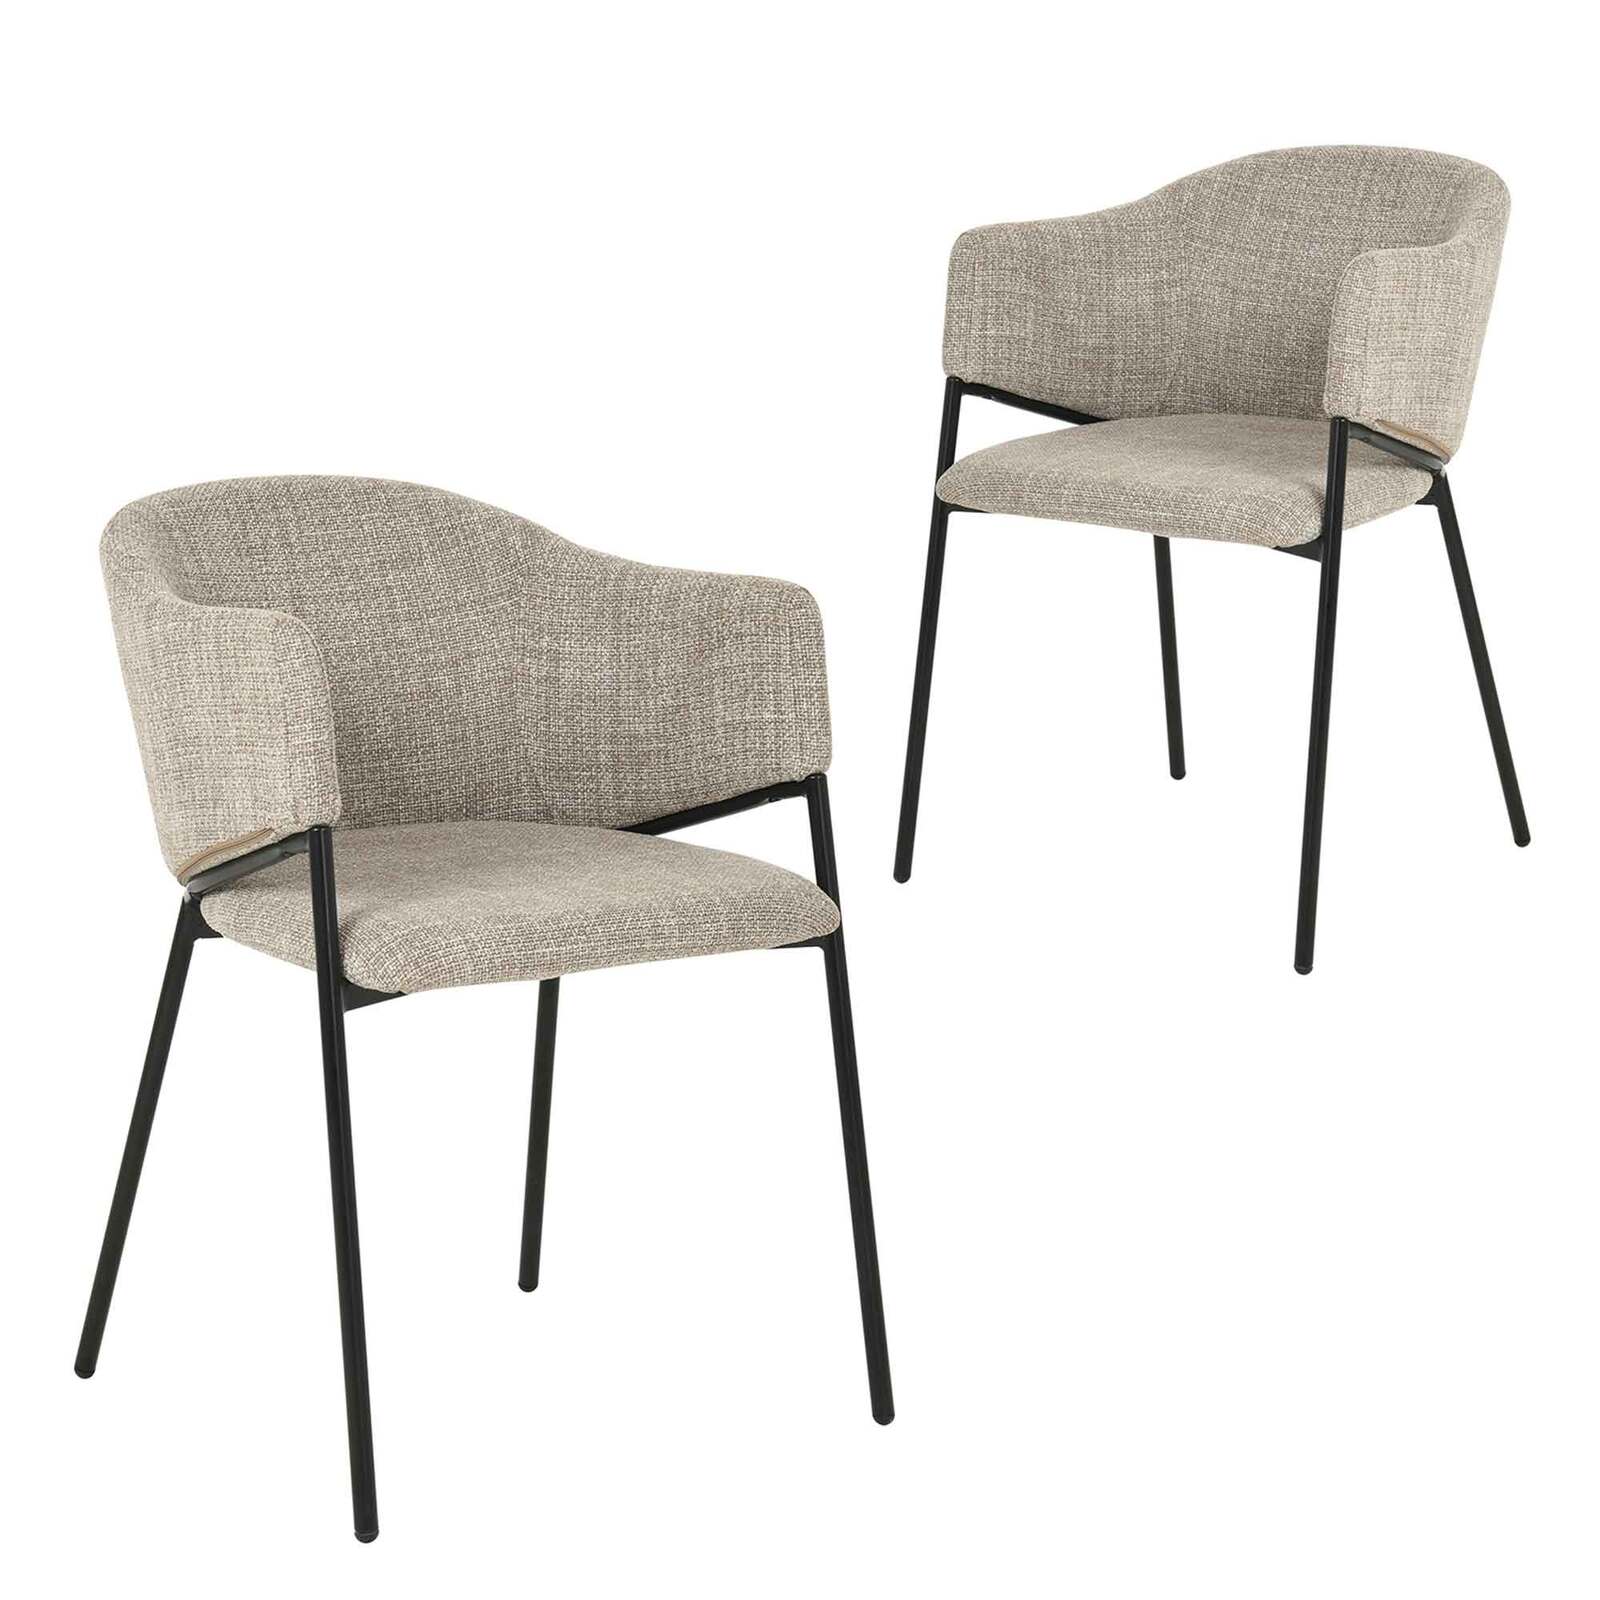 Set of 2 Amabal Dining Chairs